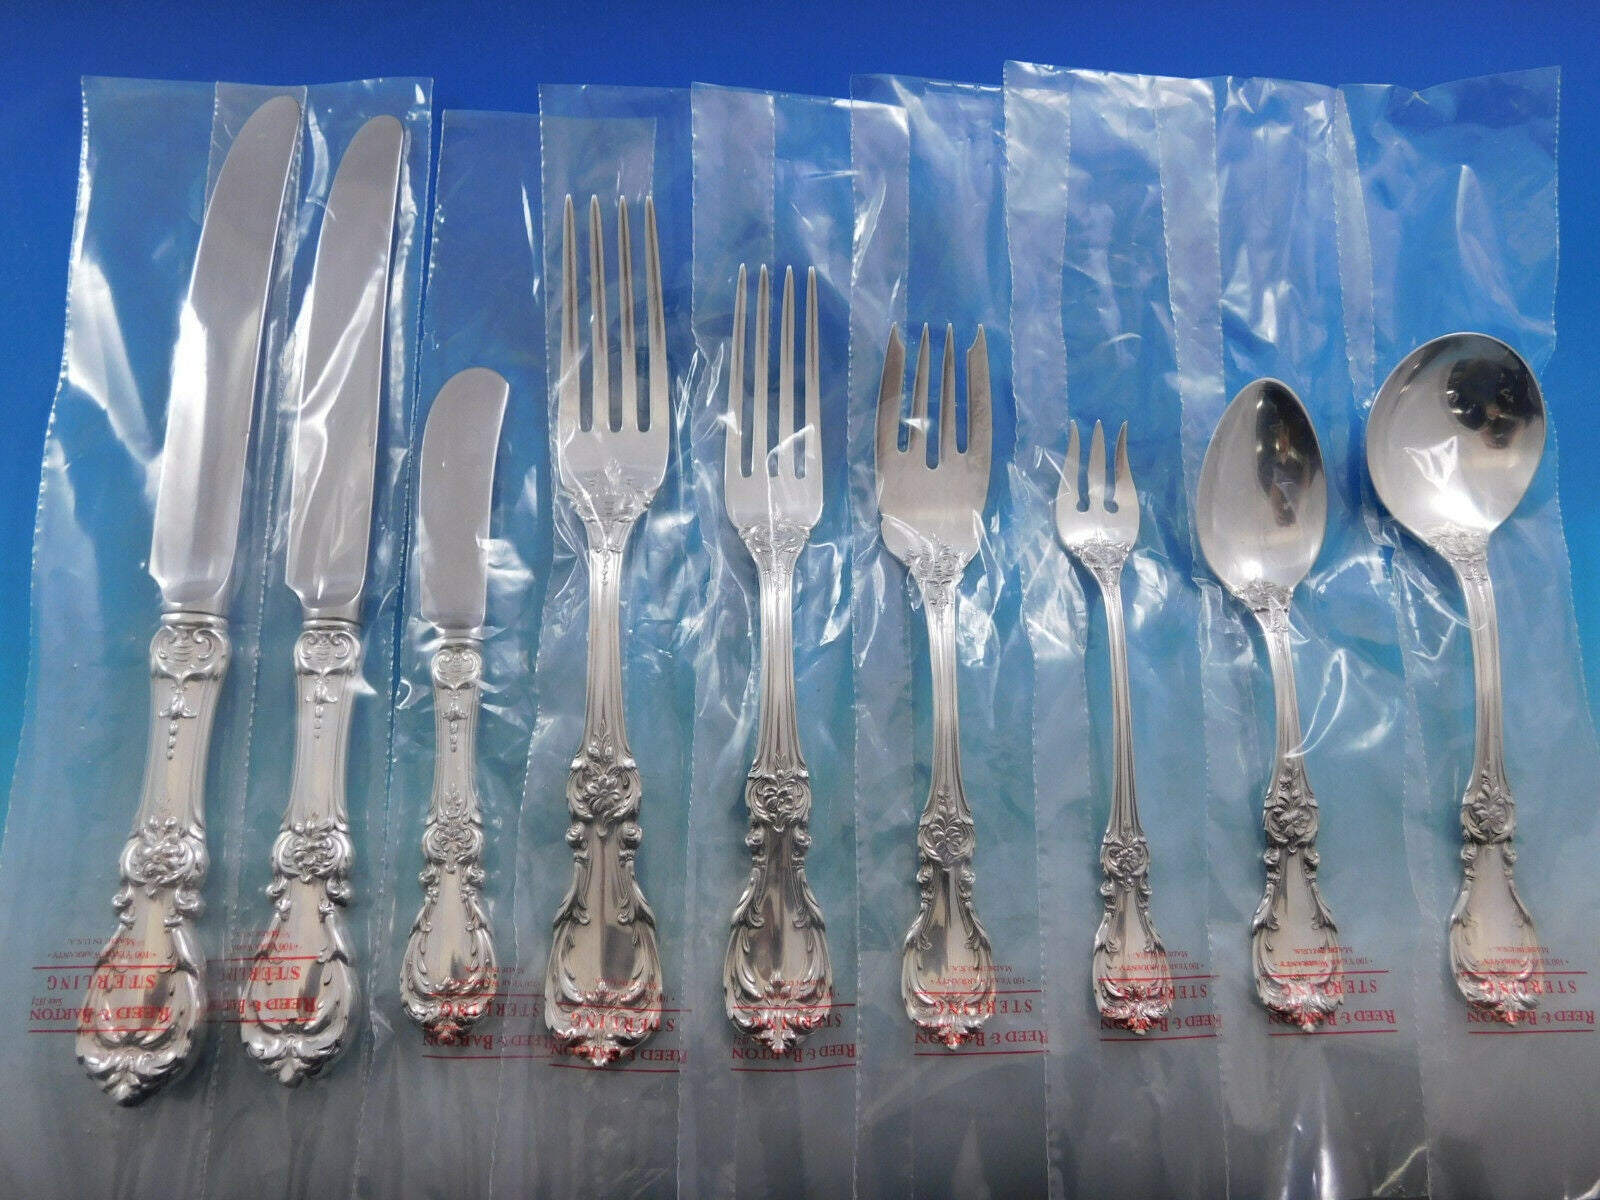 Inspired by the French Renaissance, the Burgundy Sterling Silver flatware pattern from Reed & Barton is decorated with motifs of scrolls, leaves and flowers which captures old world elegance with up-to-date flourishes. 

Unused Burgundy by Reed